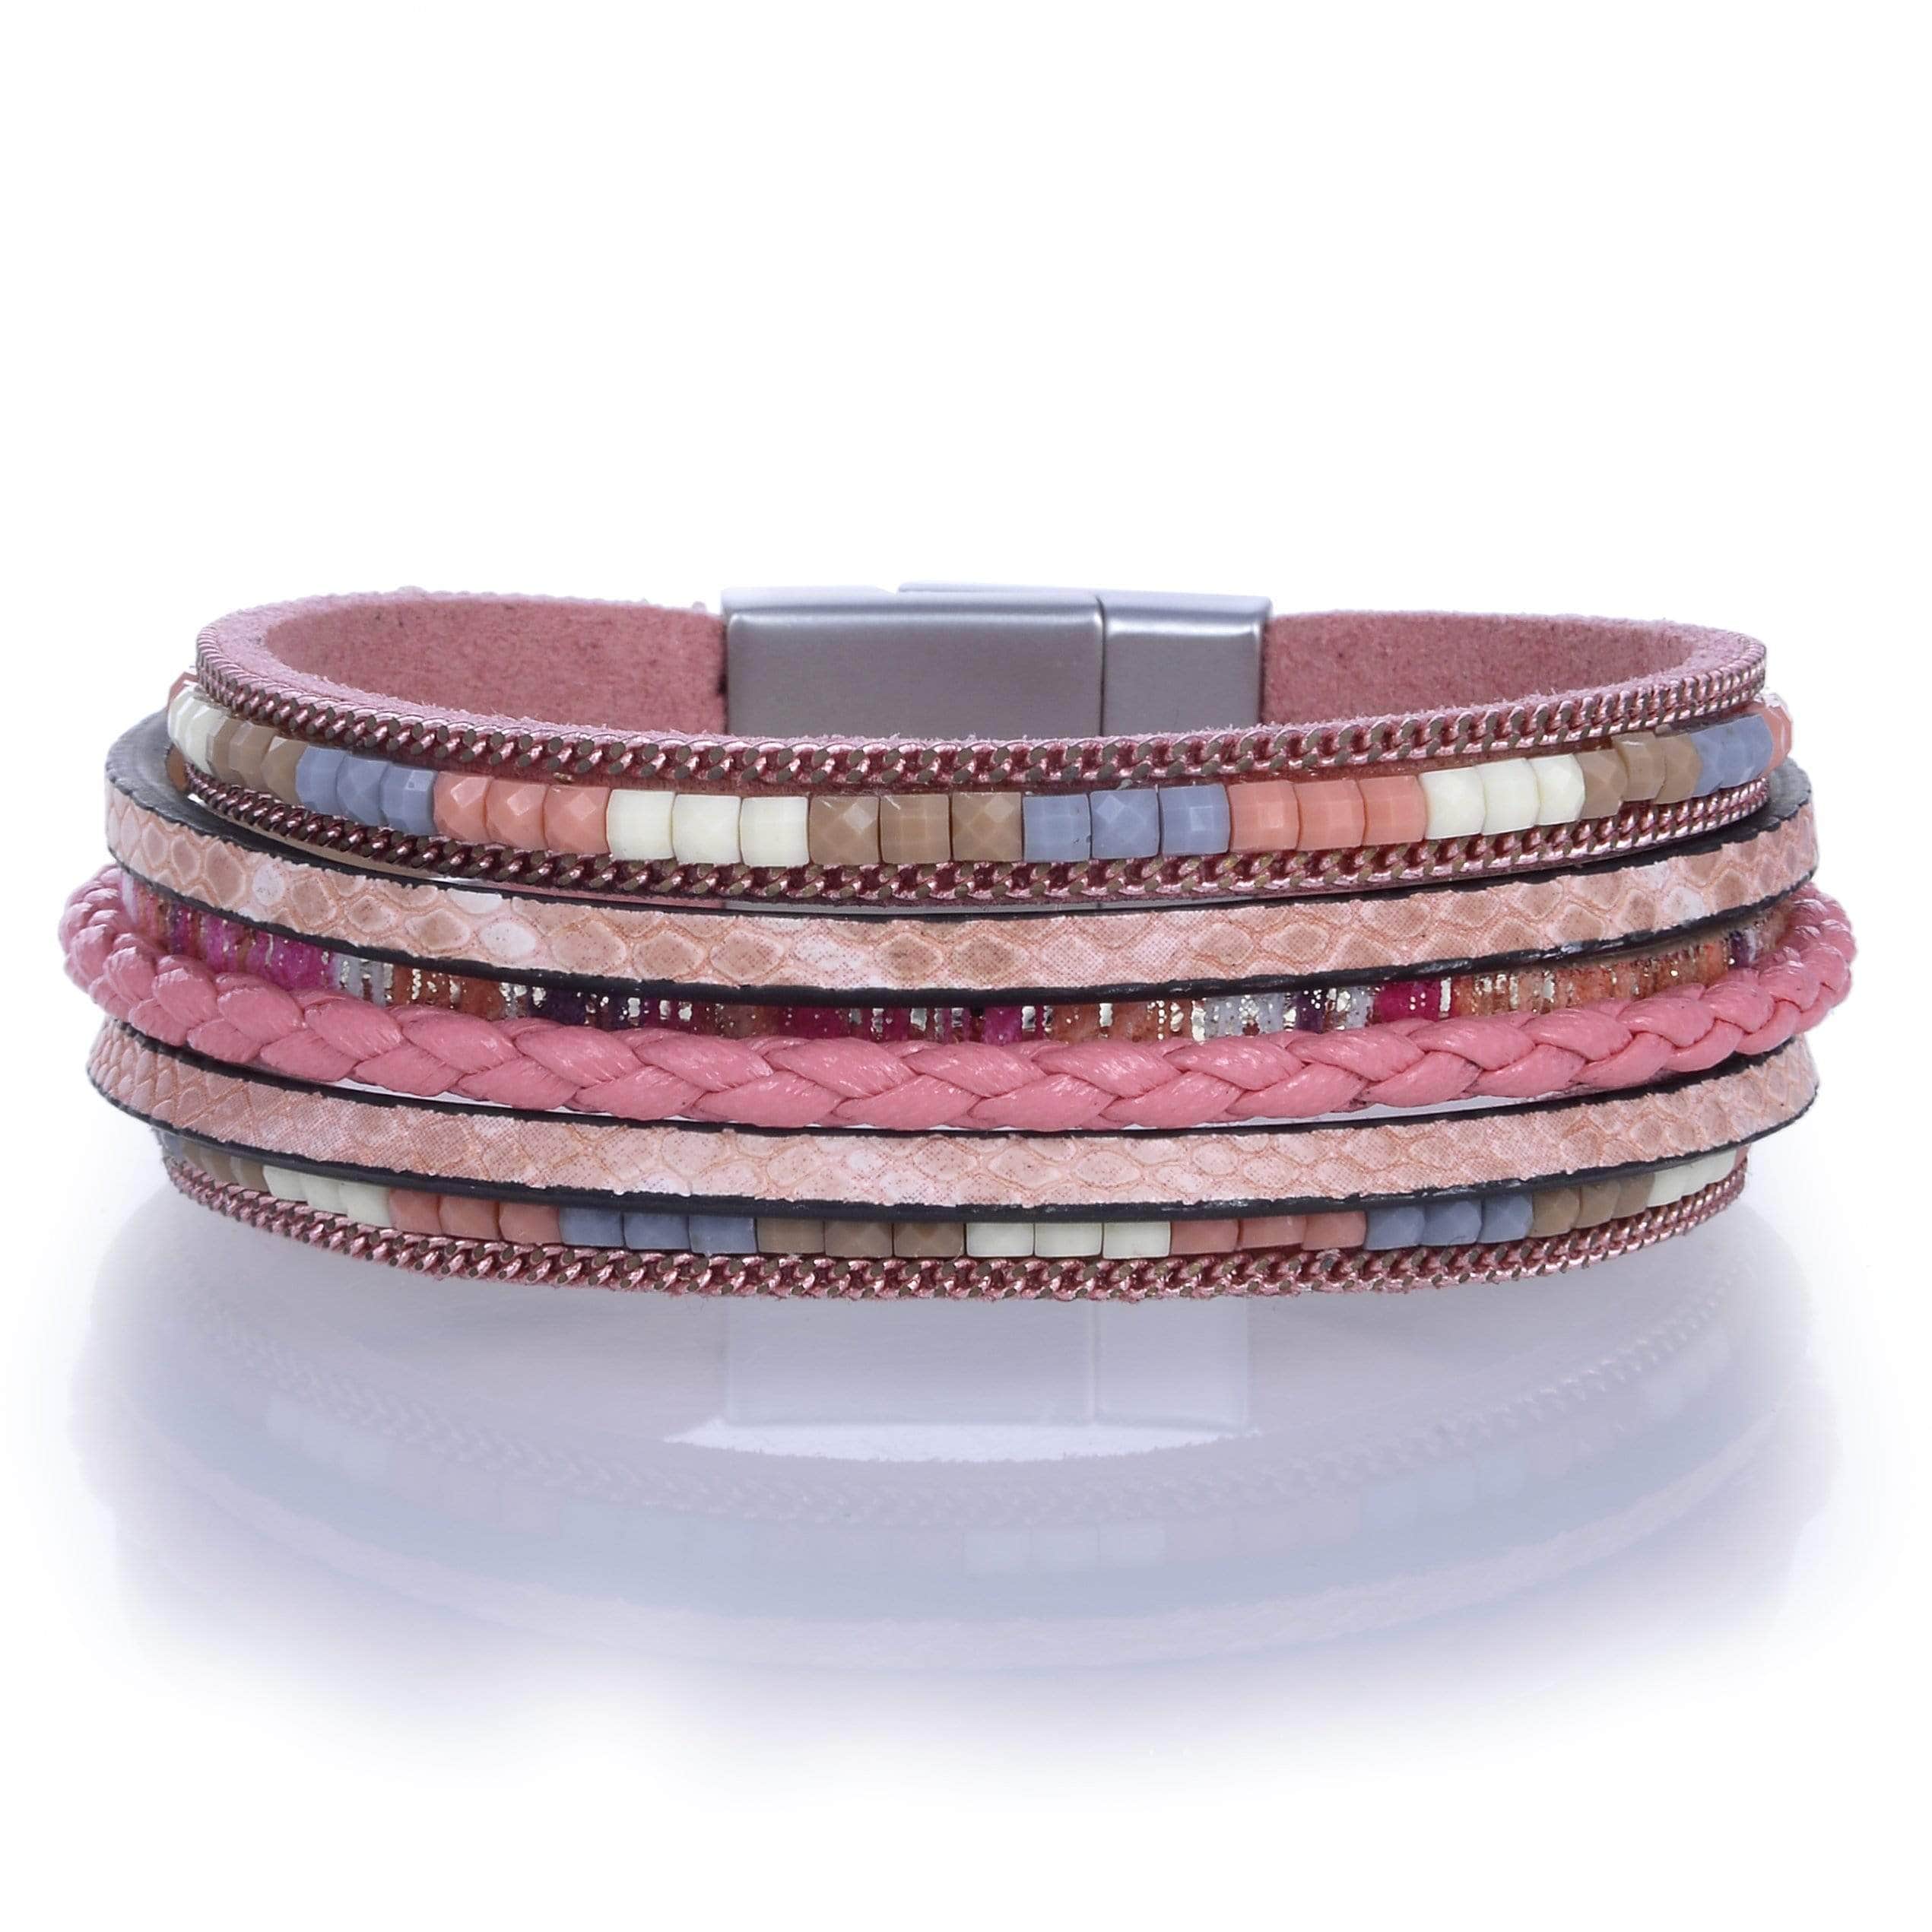 Kalifano Multiwrap Bracelets Multiple Layer Strand Bracelet Woven Leather Pink With Magnetic Clasp BMW-13-PK